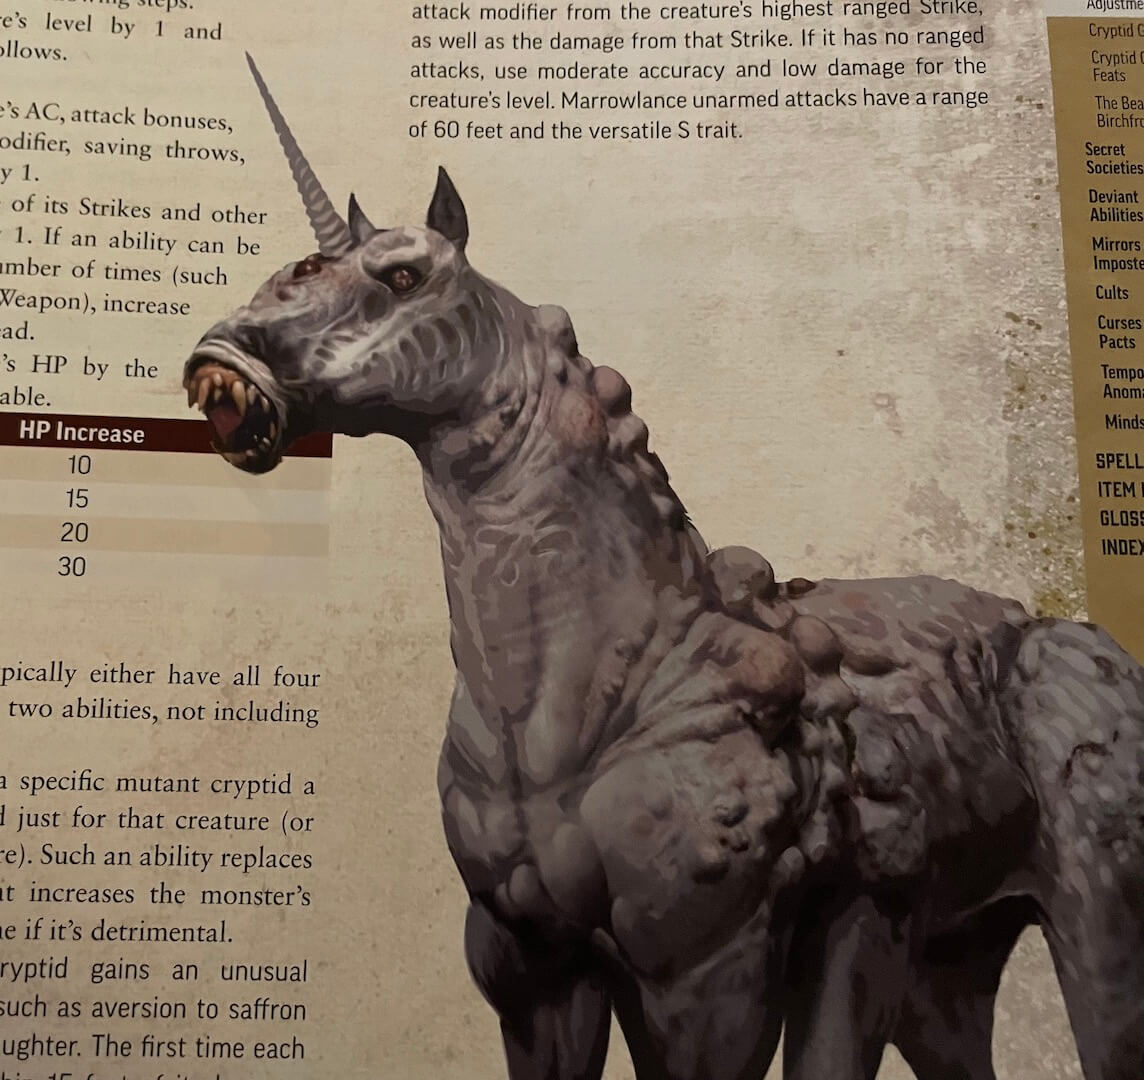 An image from Pathfinder Dark Archive depicting a mutant unicorn